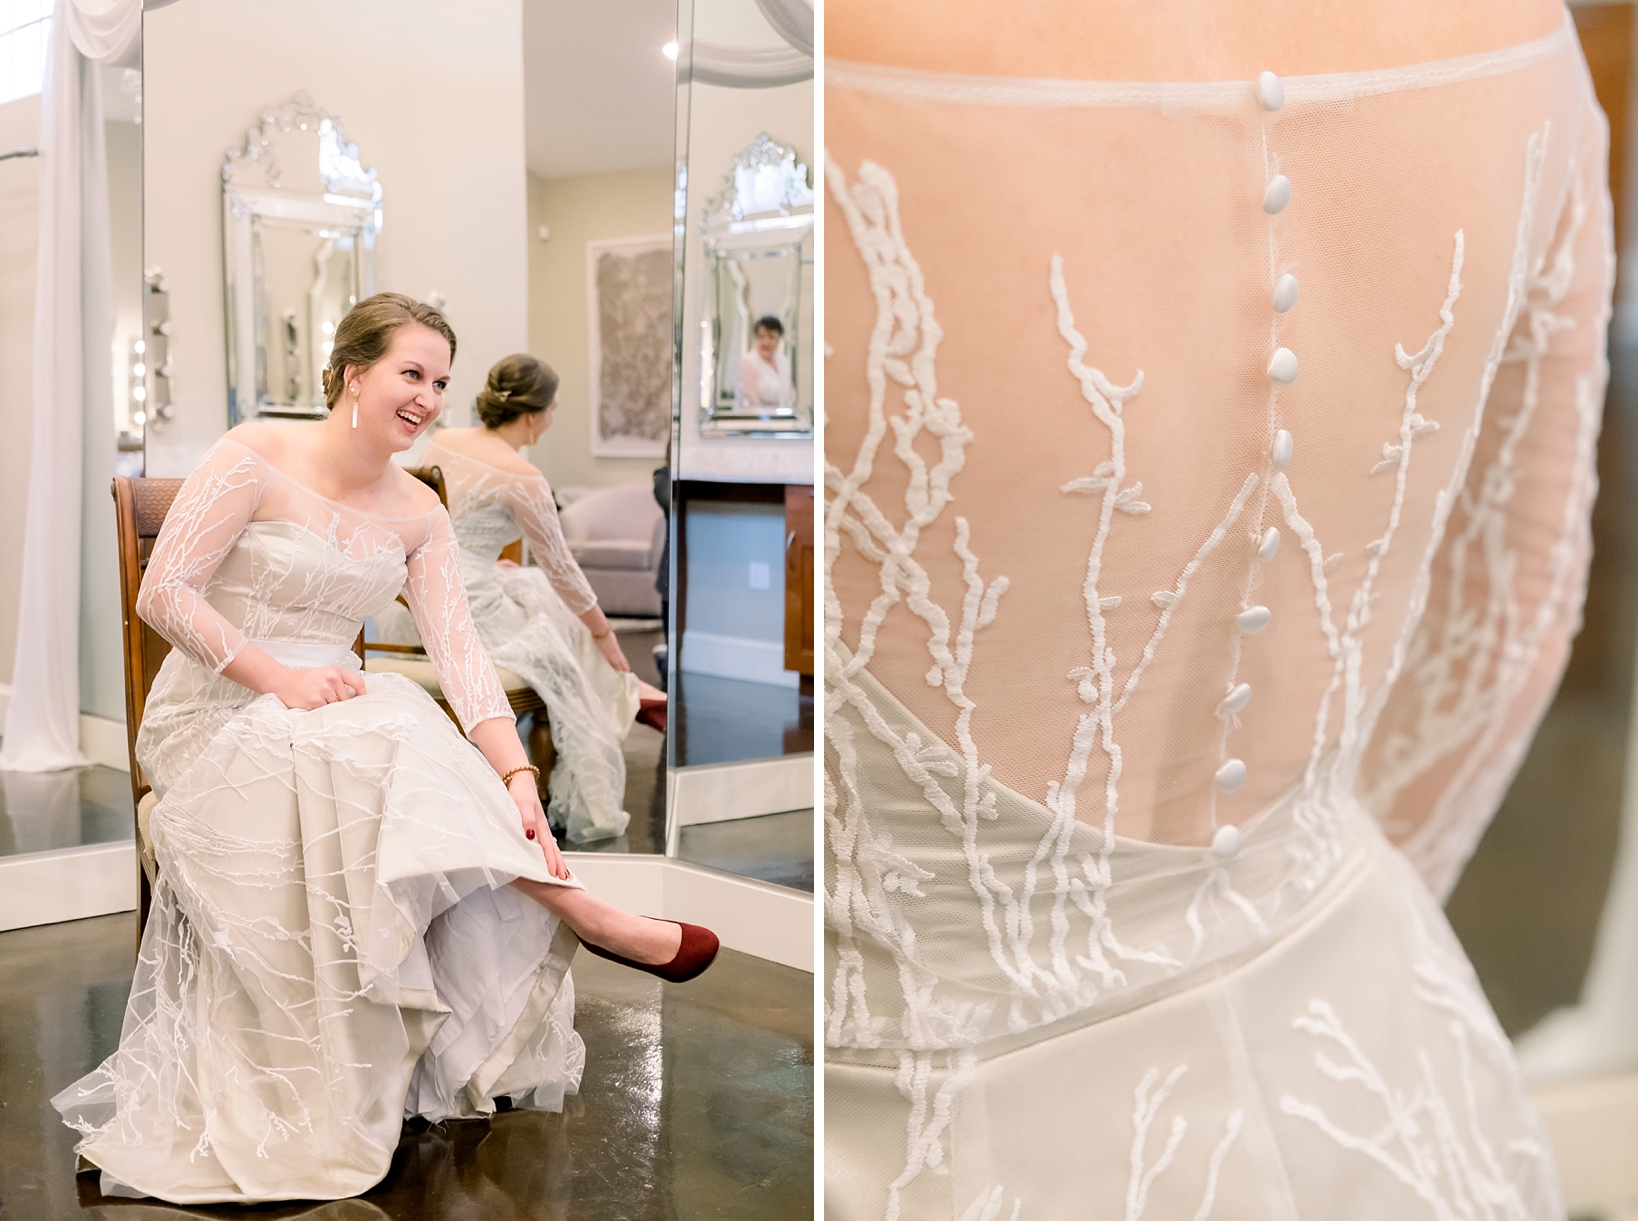 Detail of the lace in the bride's dress and a picture of the bride putting her red shoes on